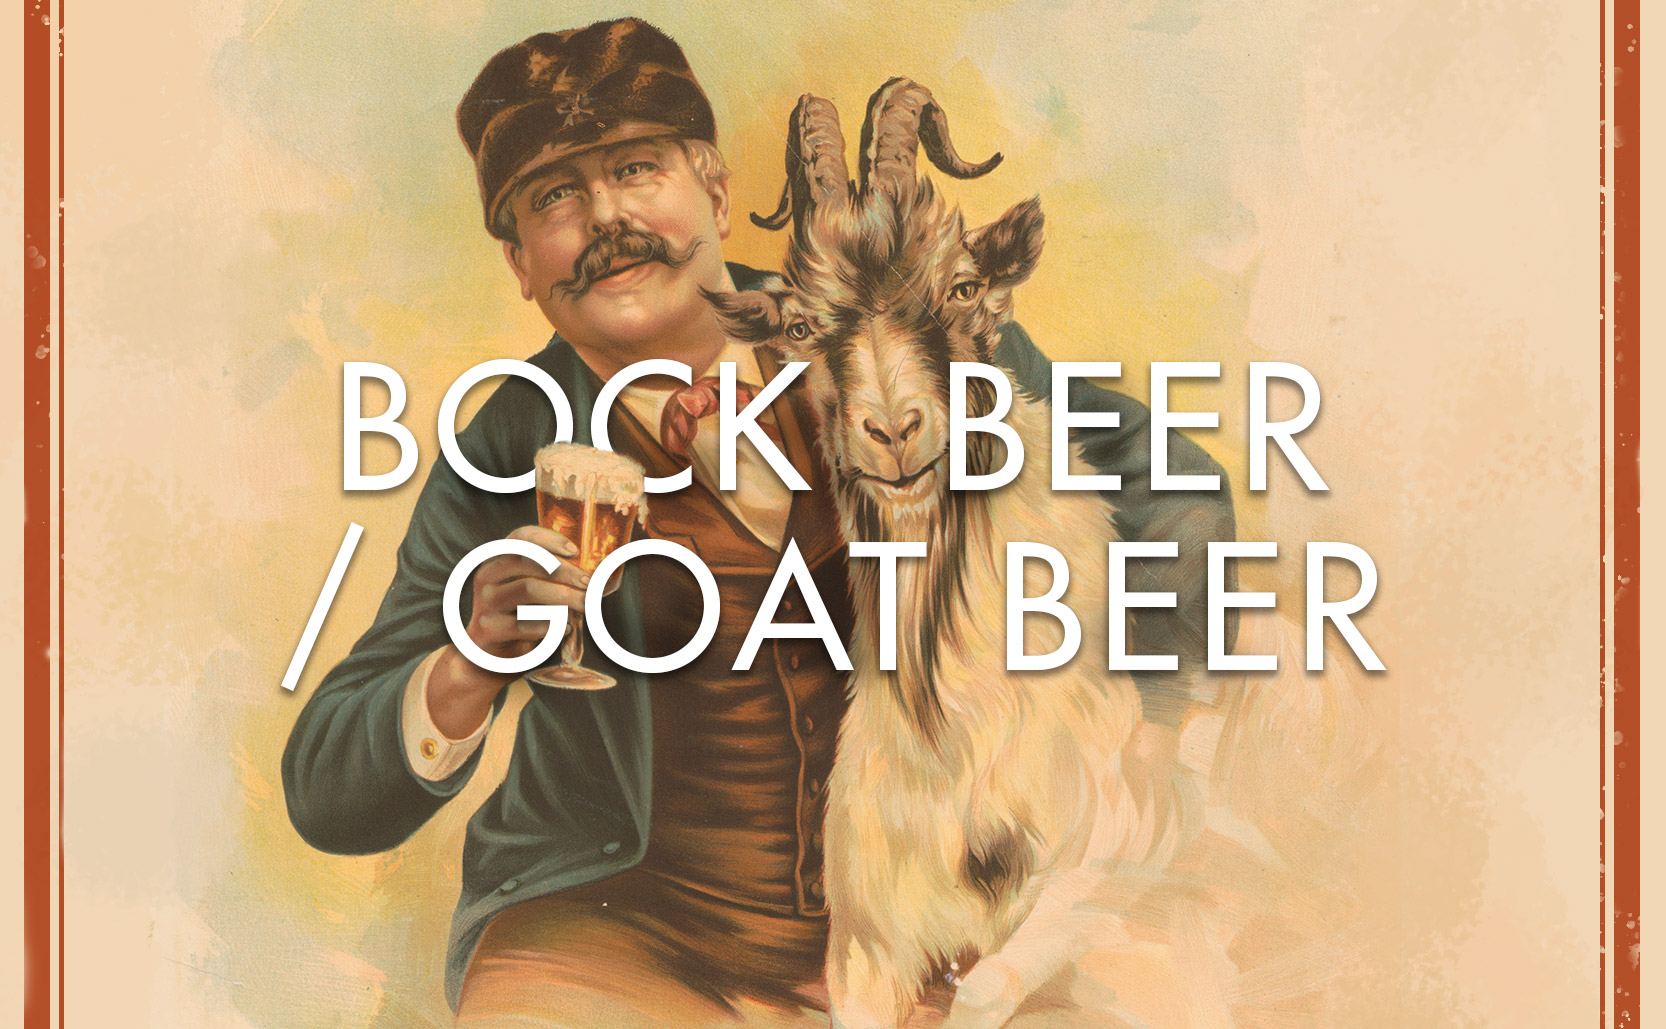 You are currently viewing Bock Beer / Goat Beer